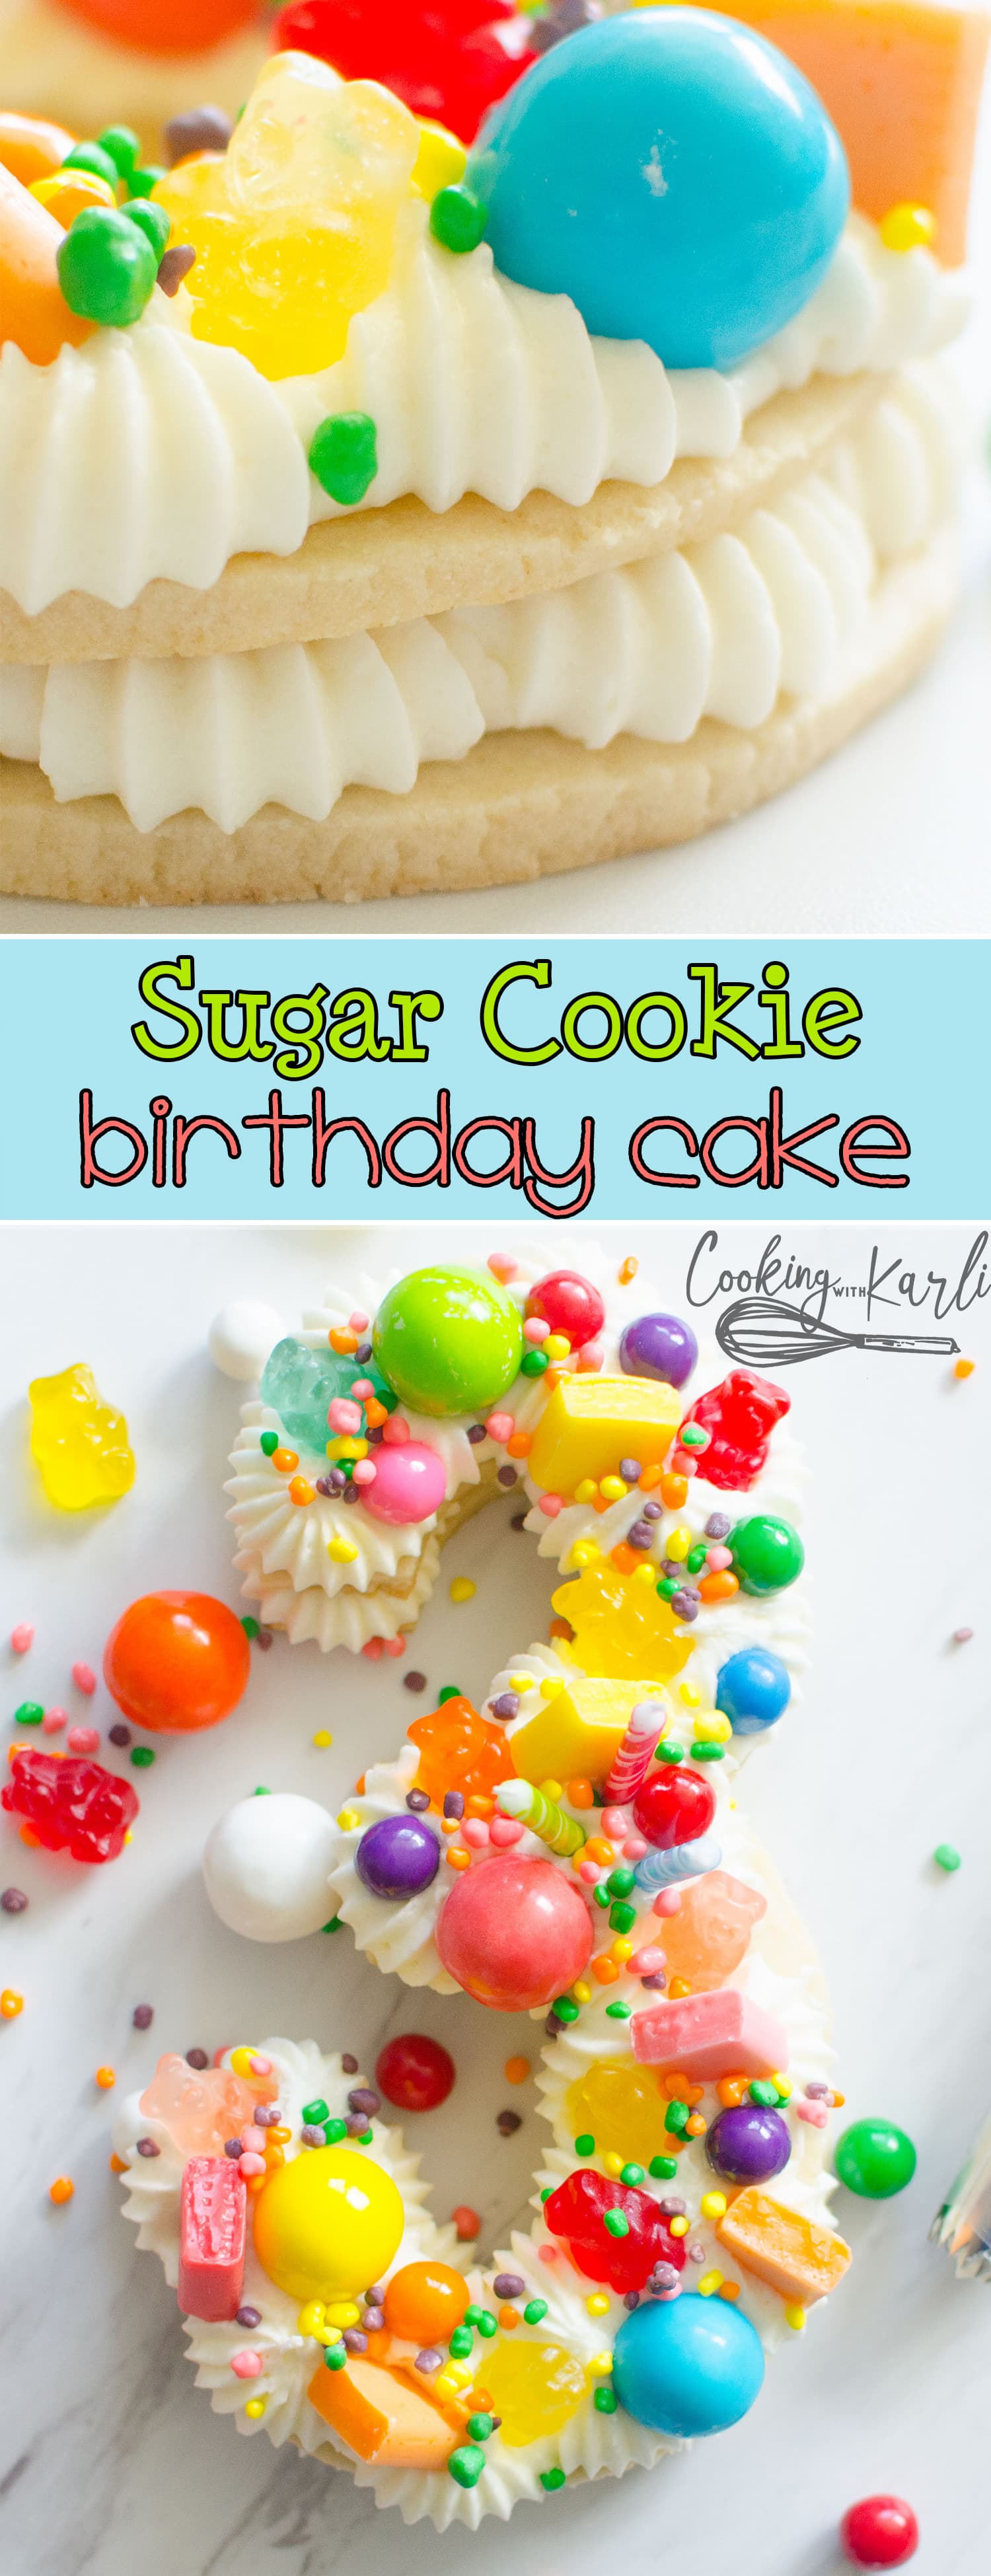 Sugar Cookie Birthday Cake is a double layer sugar cookie, filled and piped with vanilla buttercream. The Birthday Cake is topped with colorful gumballs, gummy candies and nerds. |Cooking with Karli| #birthdaycake #sugarcookies #recipe #candy #maxcake #3yearold #birtdhay #party 